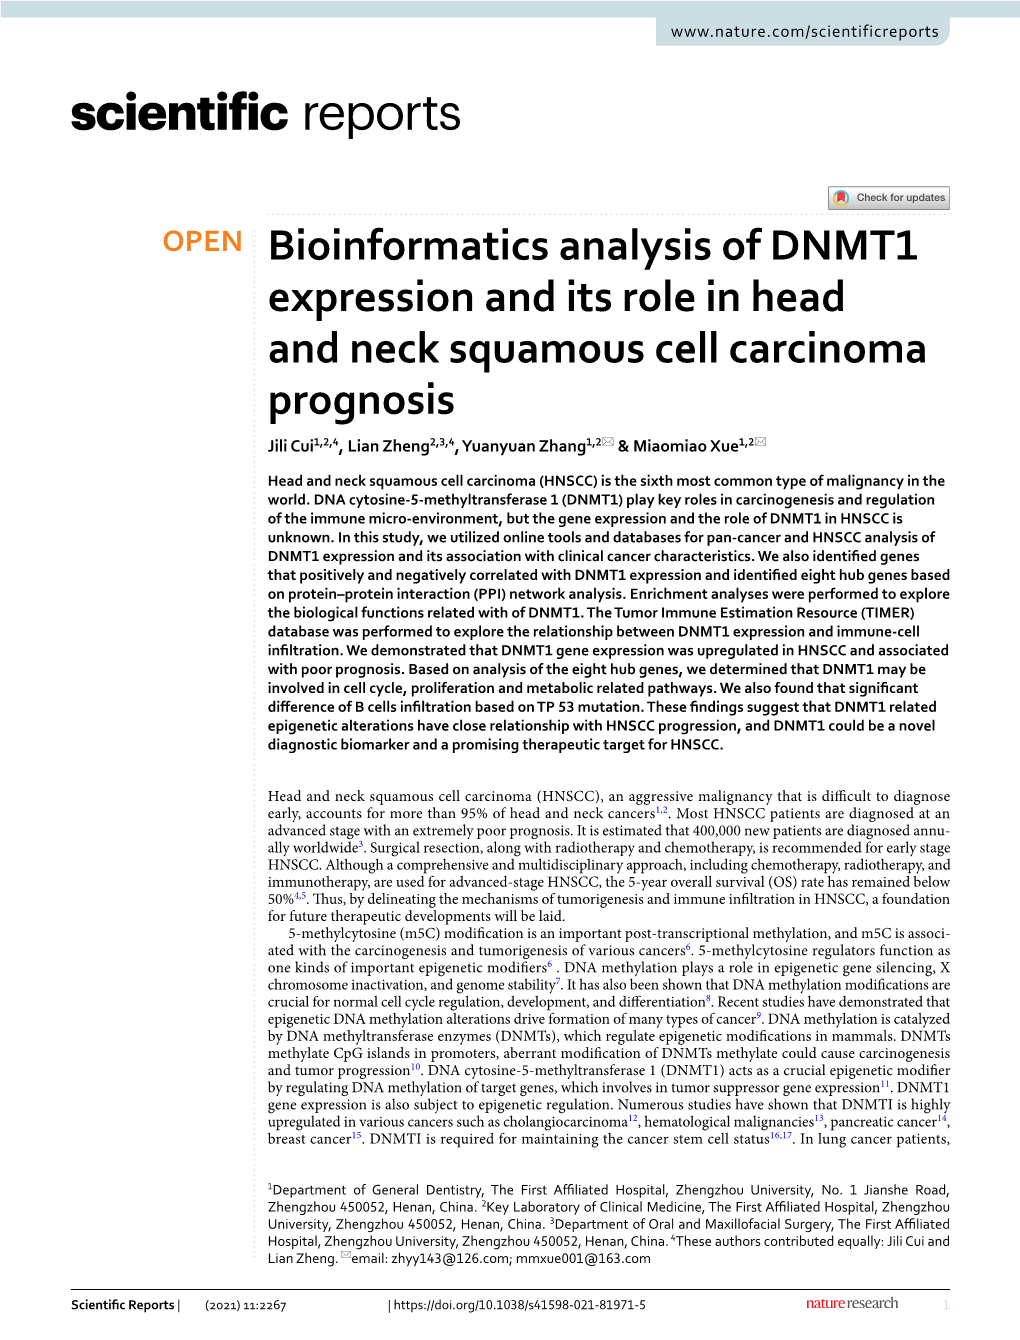 Bioinformatics Analysis of DNMT1 Expression and Its Role in Head And